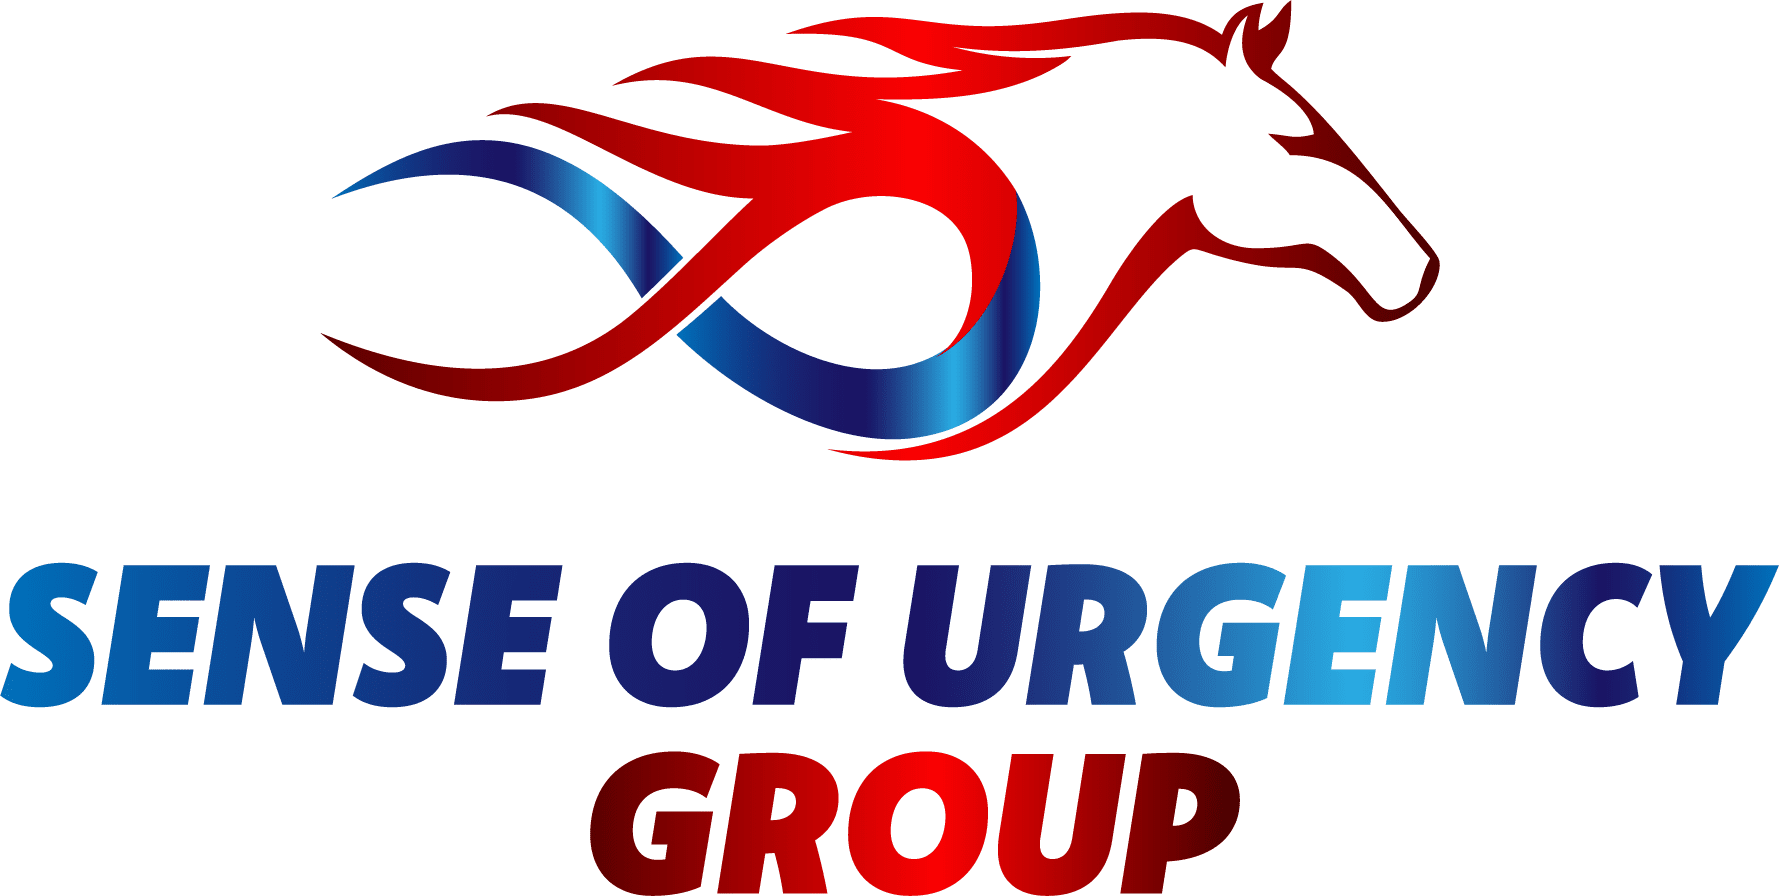 A red and blue logo for the house of urgent group.